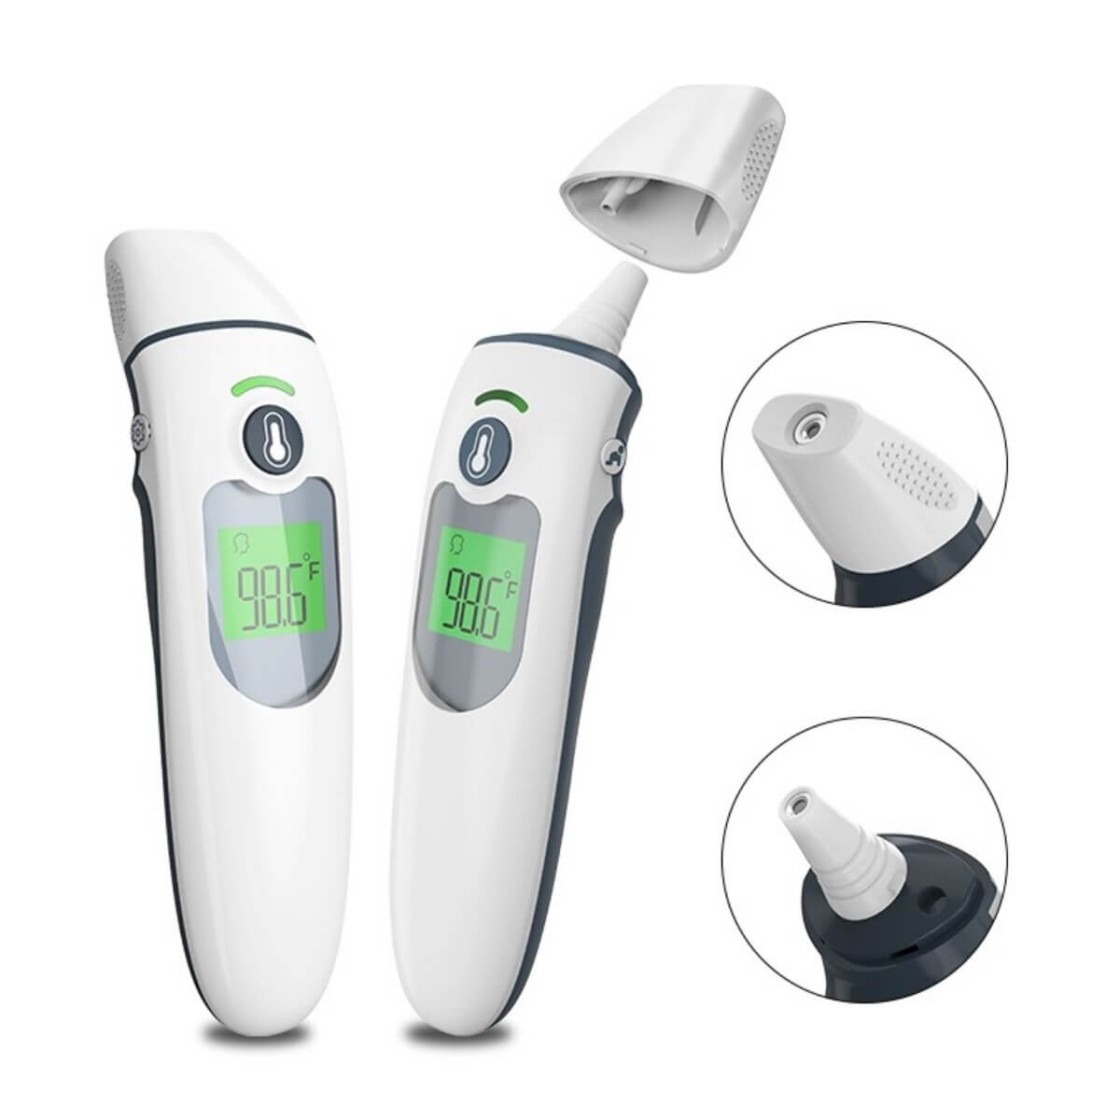 THE-292 Non Contact IR Forehead Thermometer Human Body and Object Temp